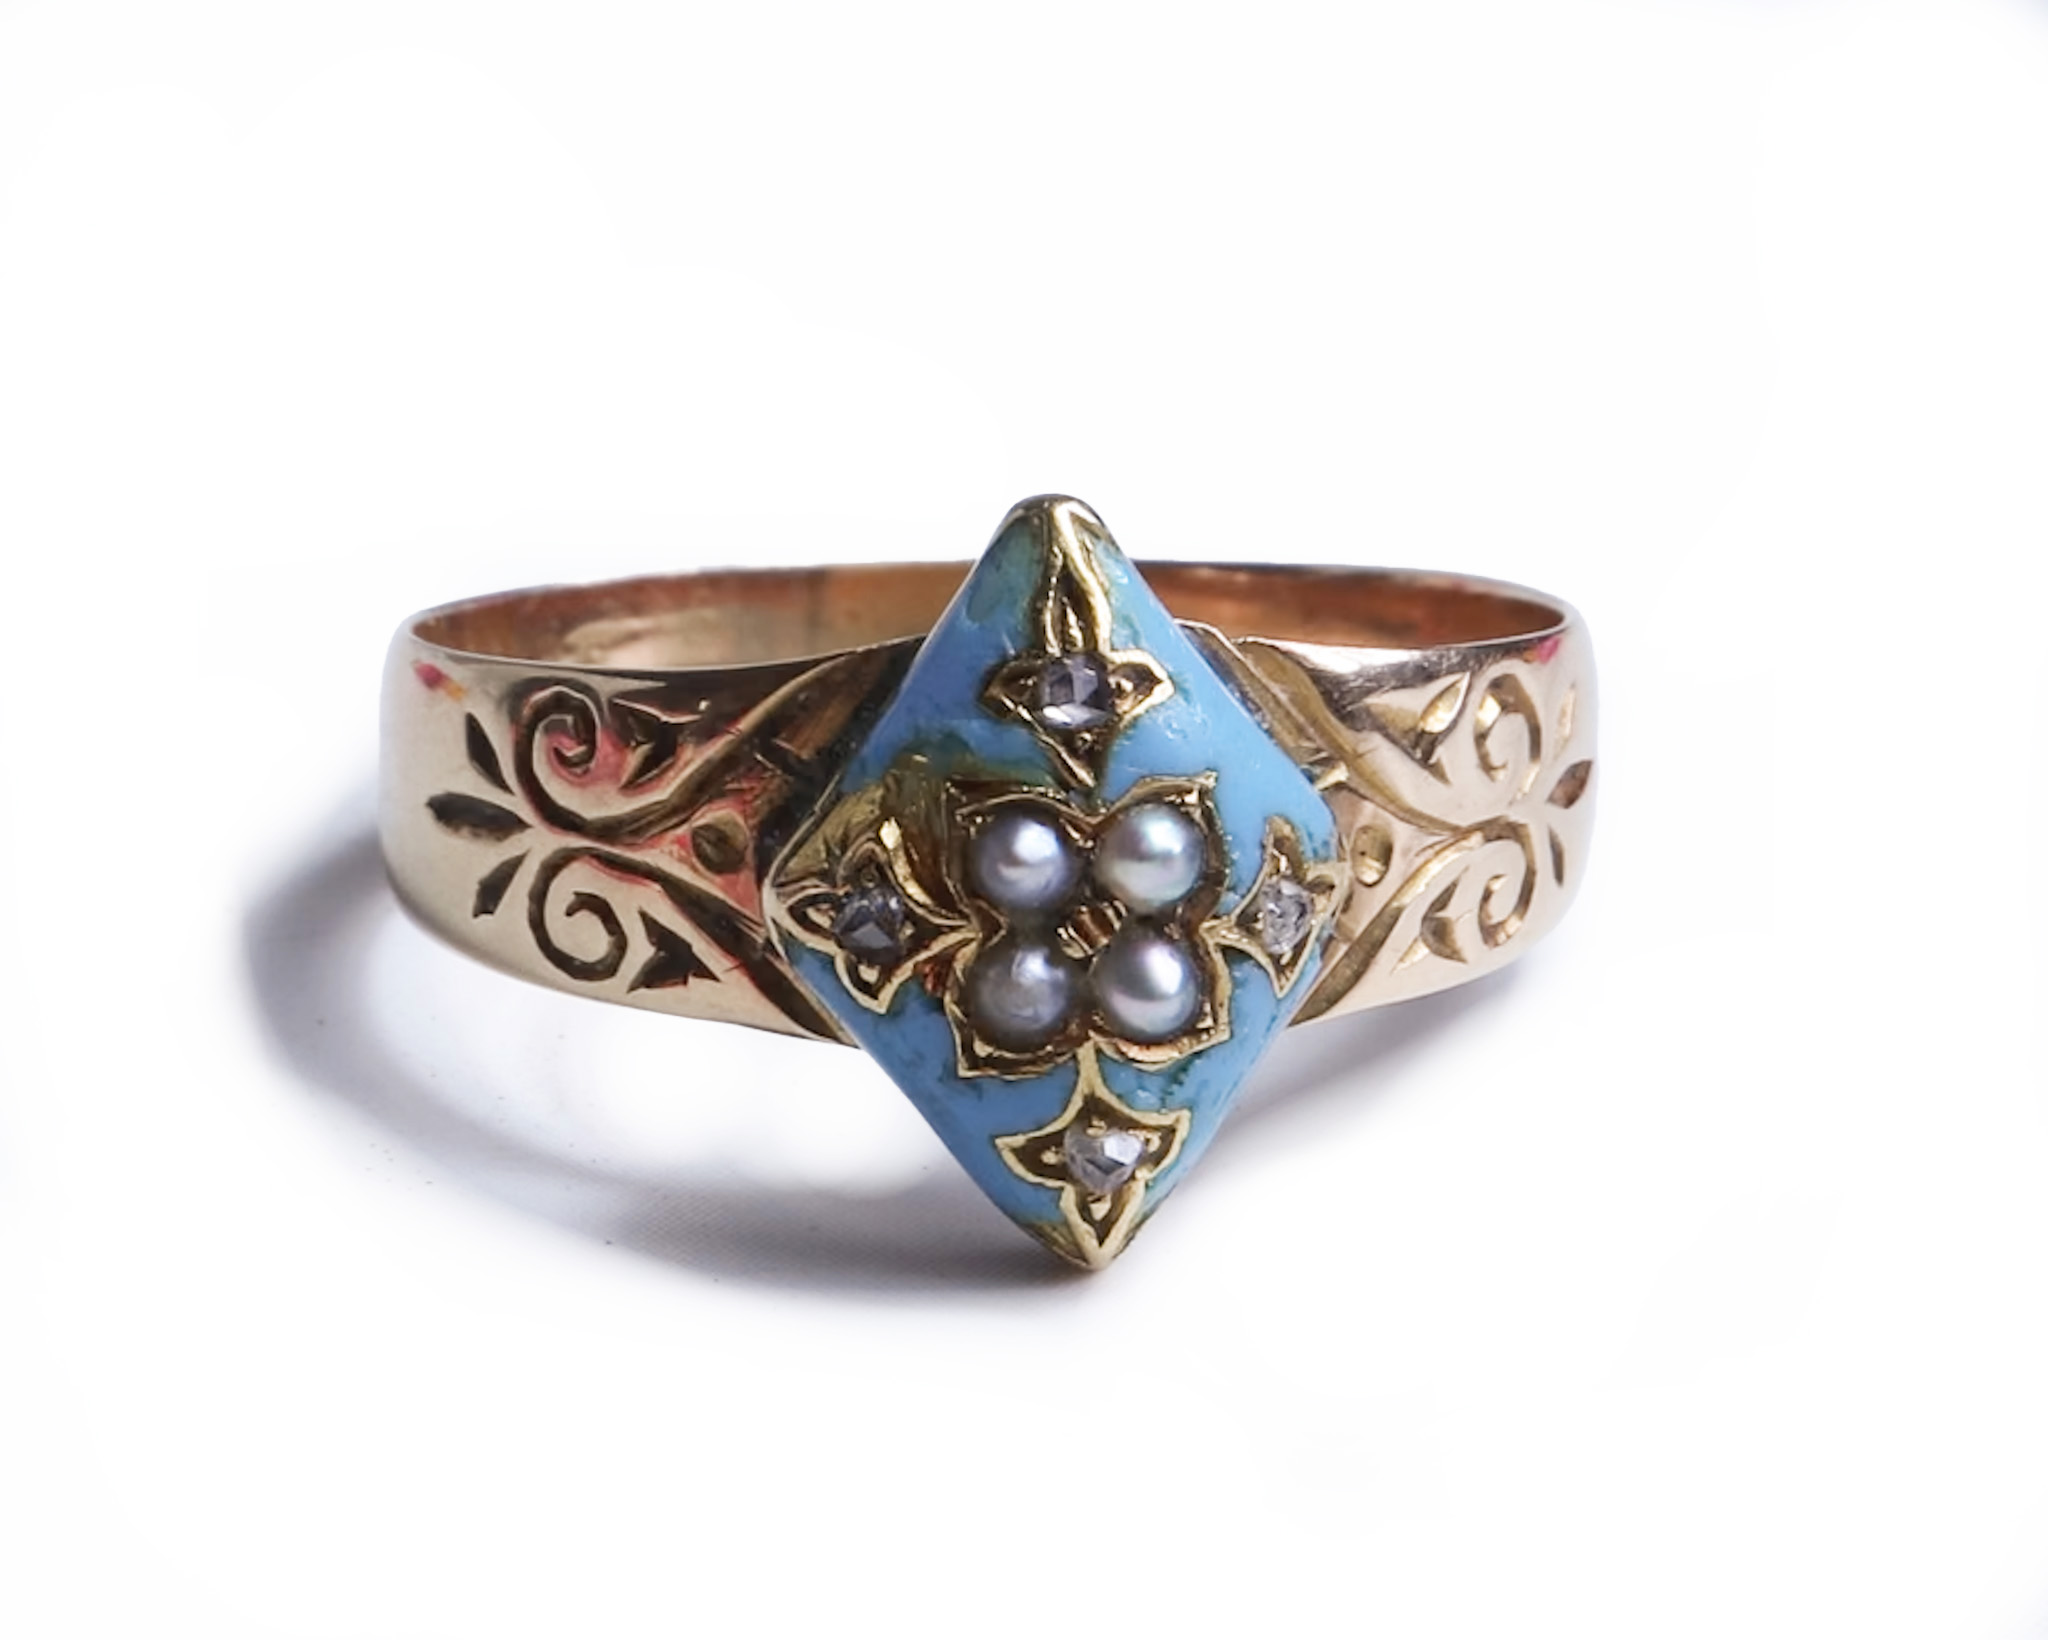 Victorian 18ct gold, enamel, diamond and seed pearl ring for sale in Leeds, Yorkshire